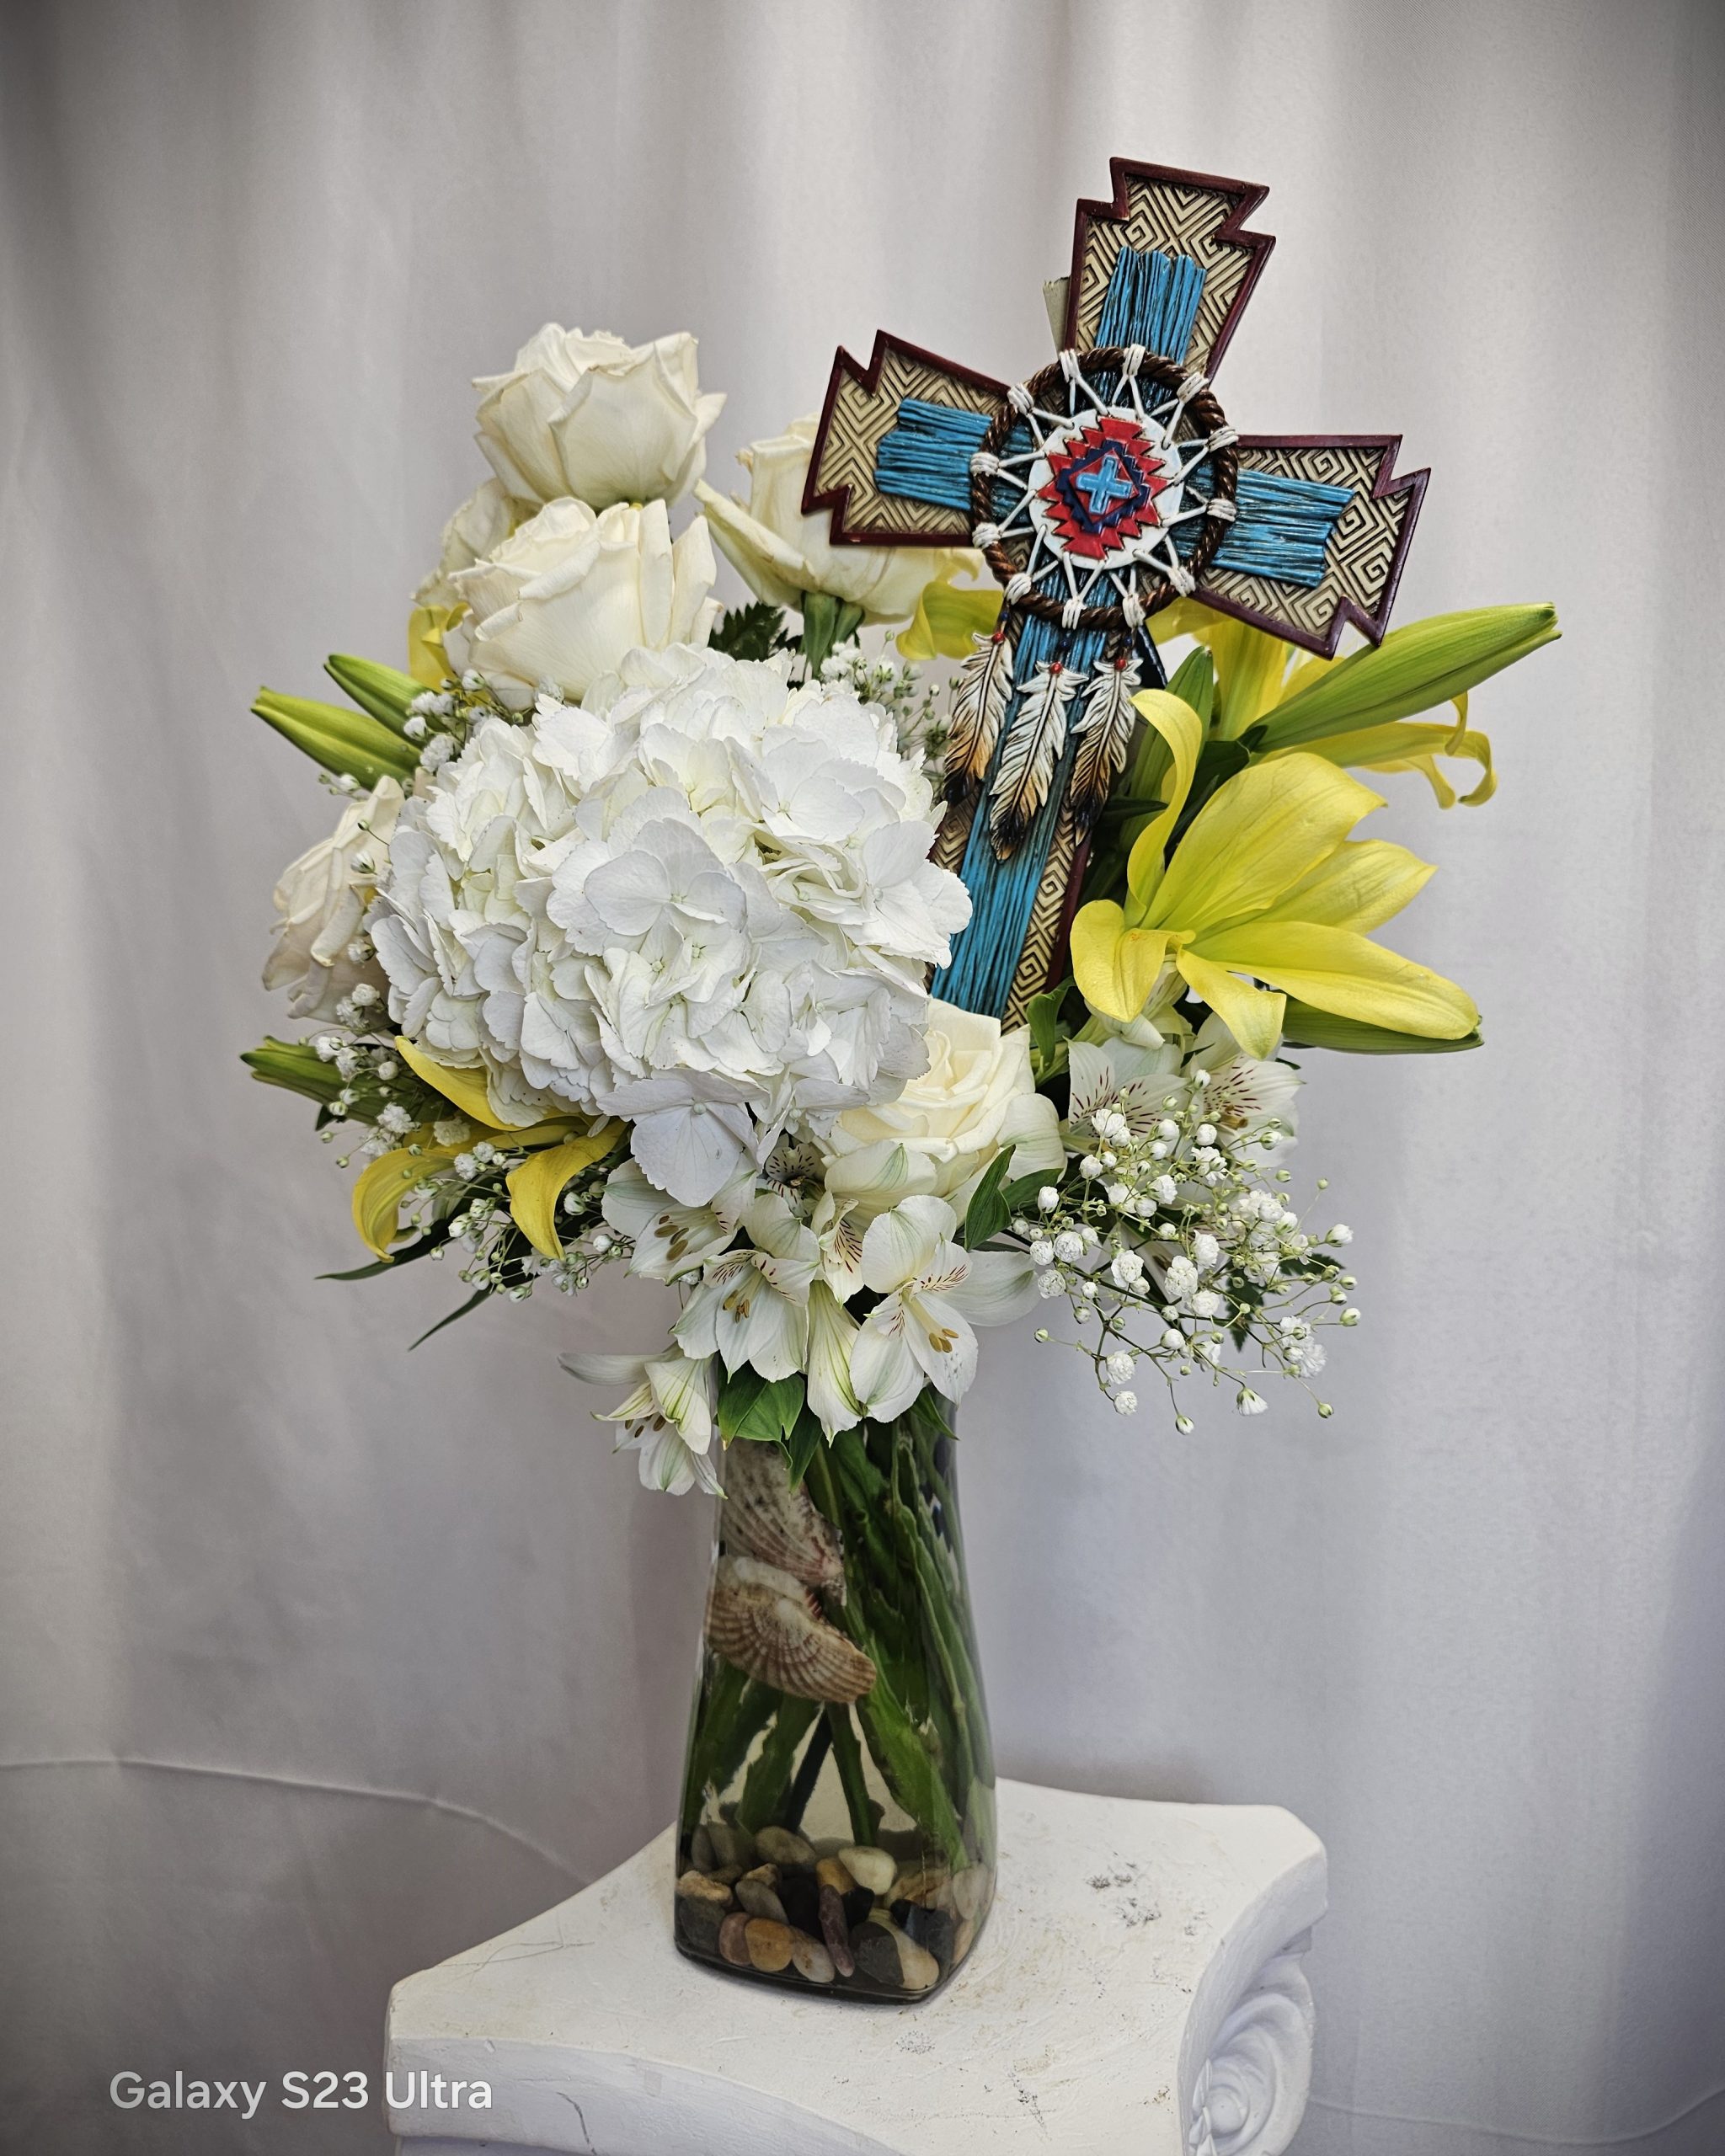 Vase with Aztec Cross - Hot Springs Florist Gifts